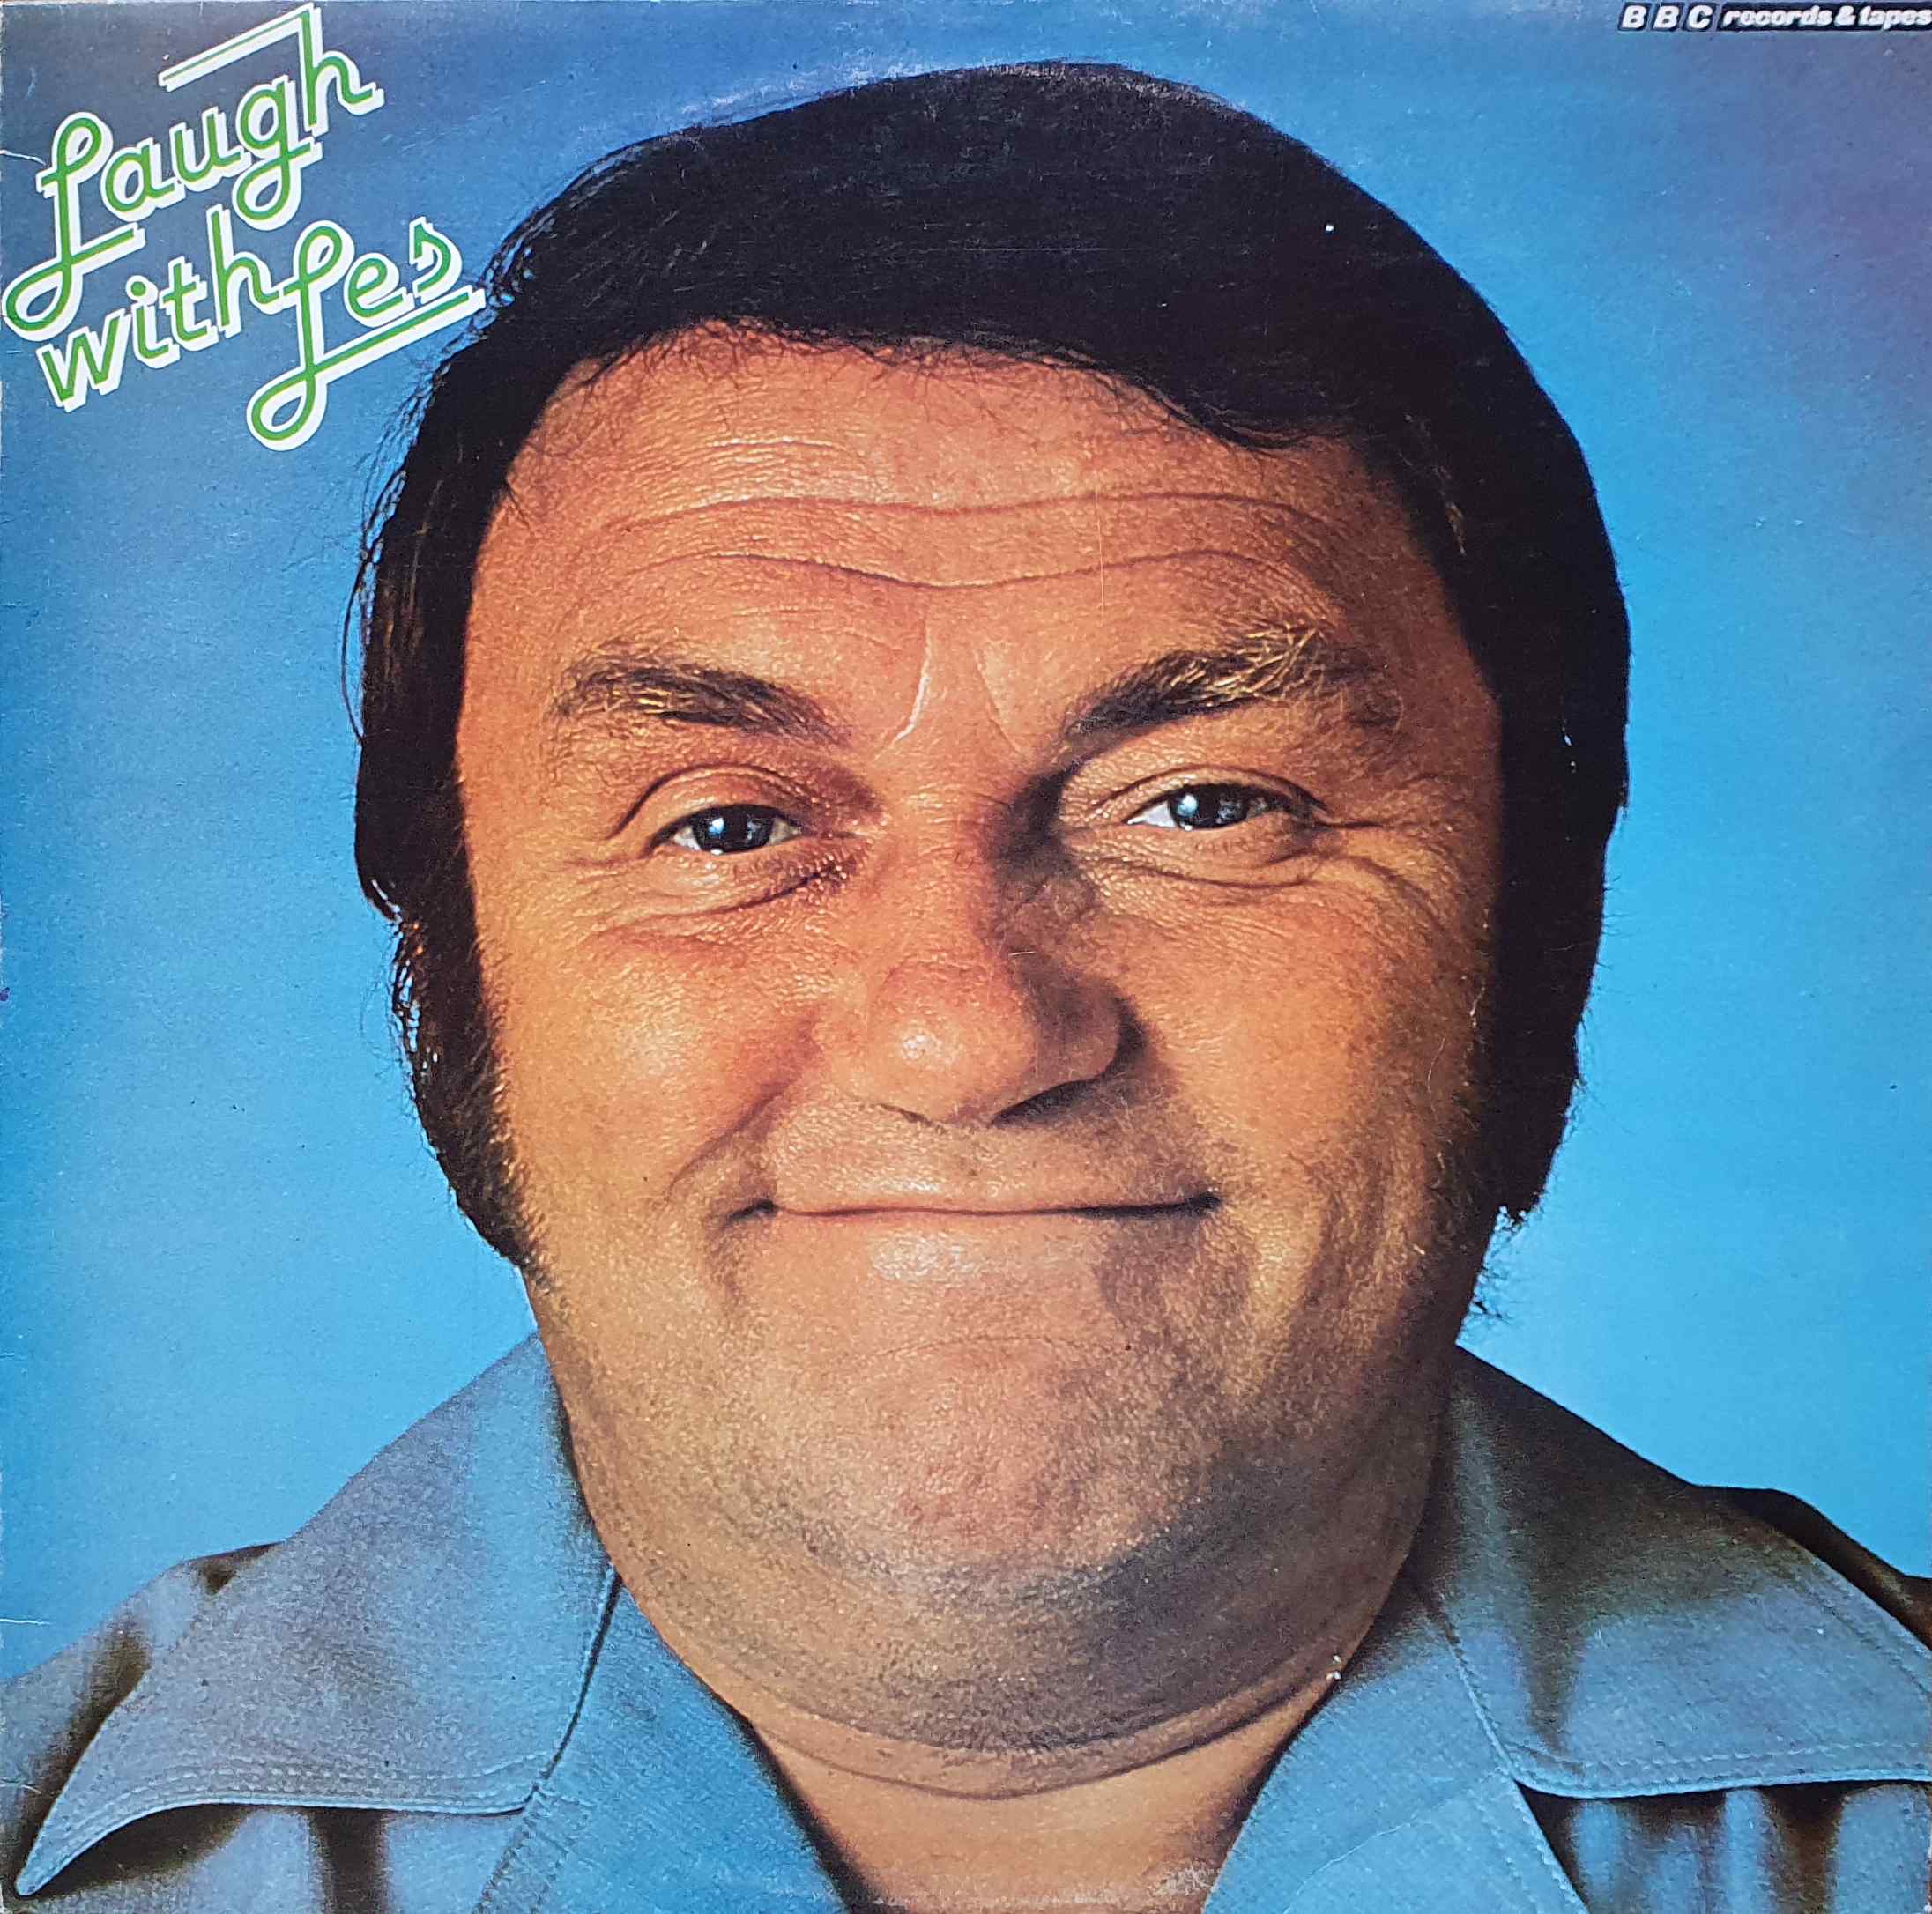 Picture of Laugh with Les Dawson by artist Les Dawson from the BBC albums - Records and Tapes library